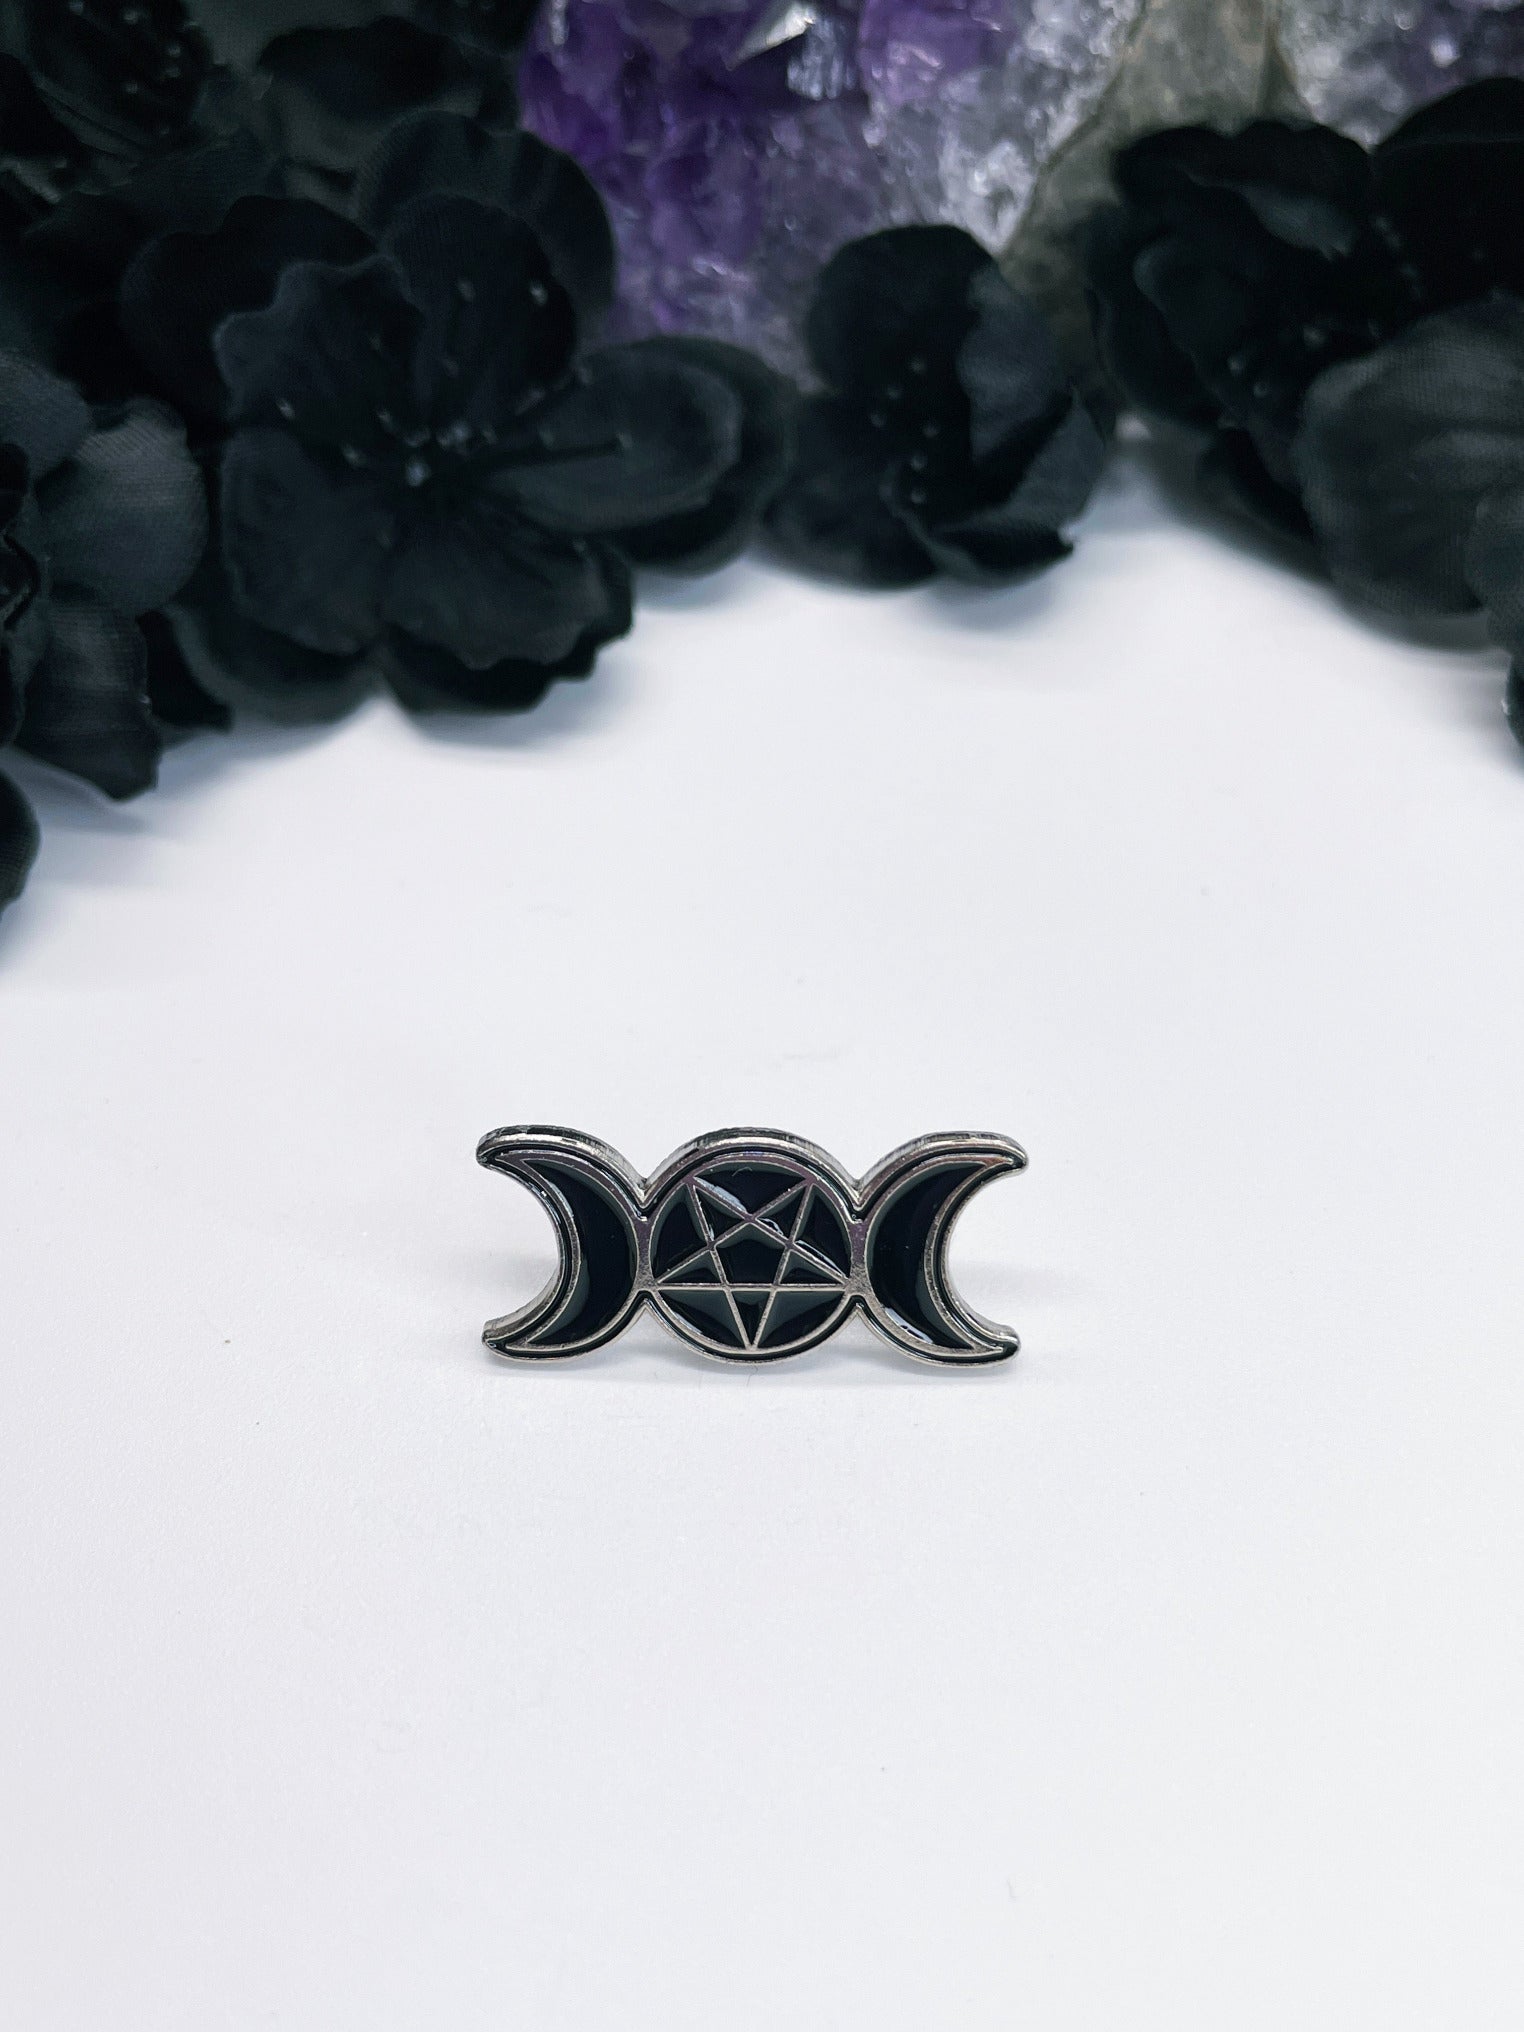 Pictured is an enamel pin of a triple moon symbol